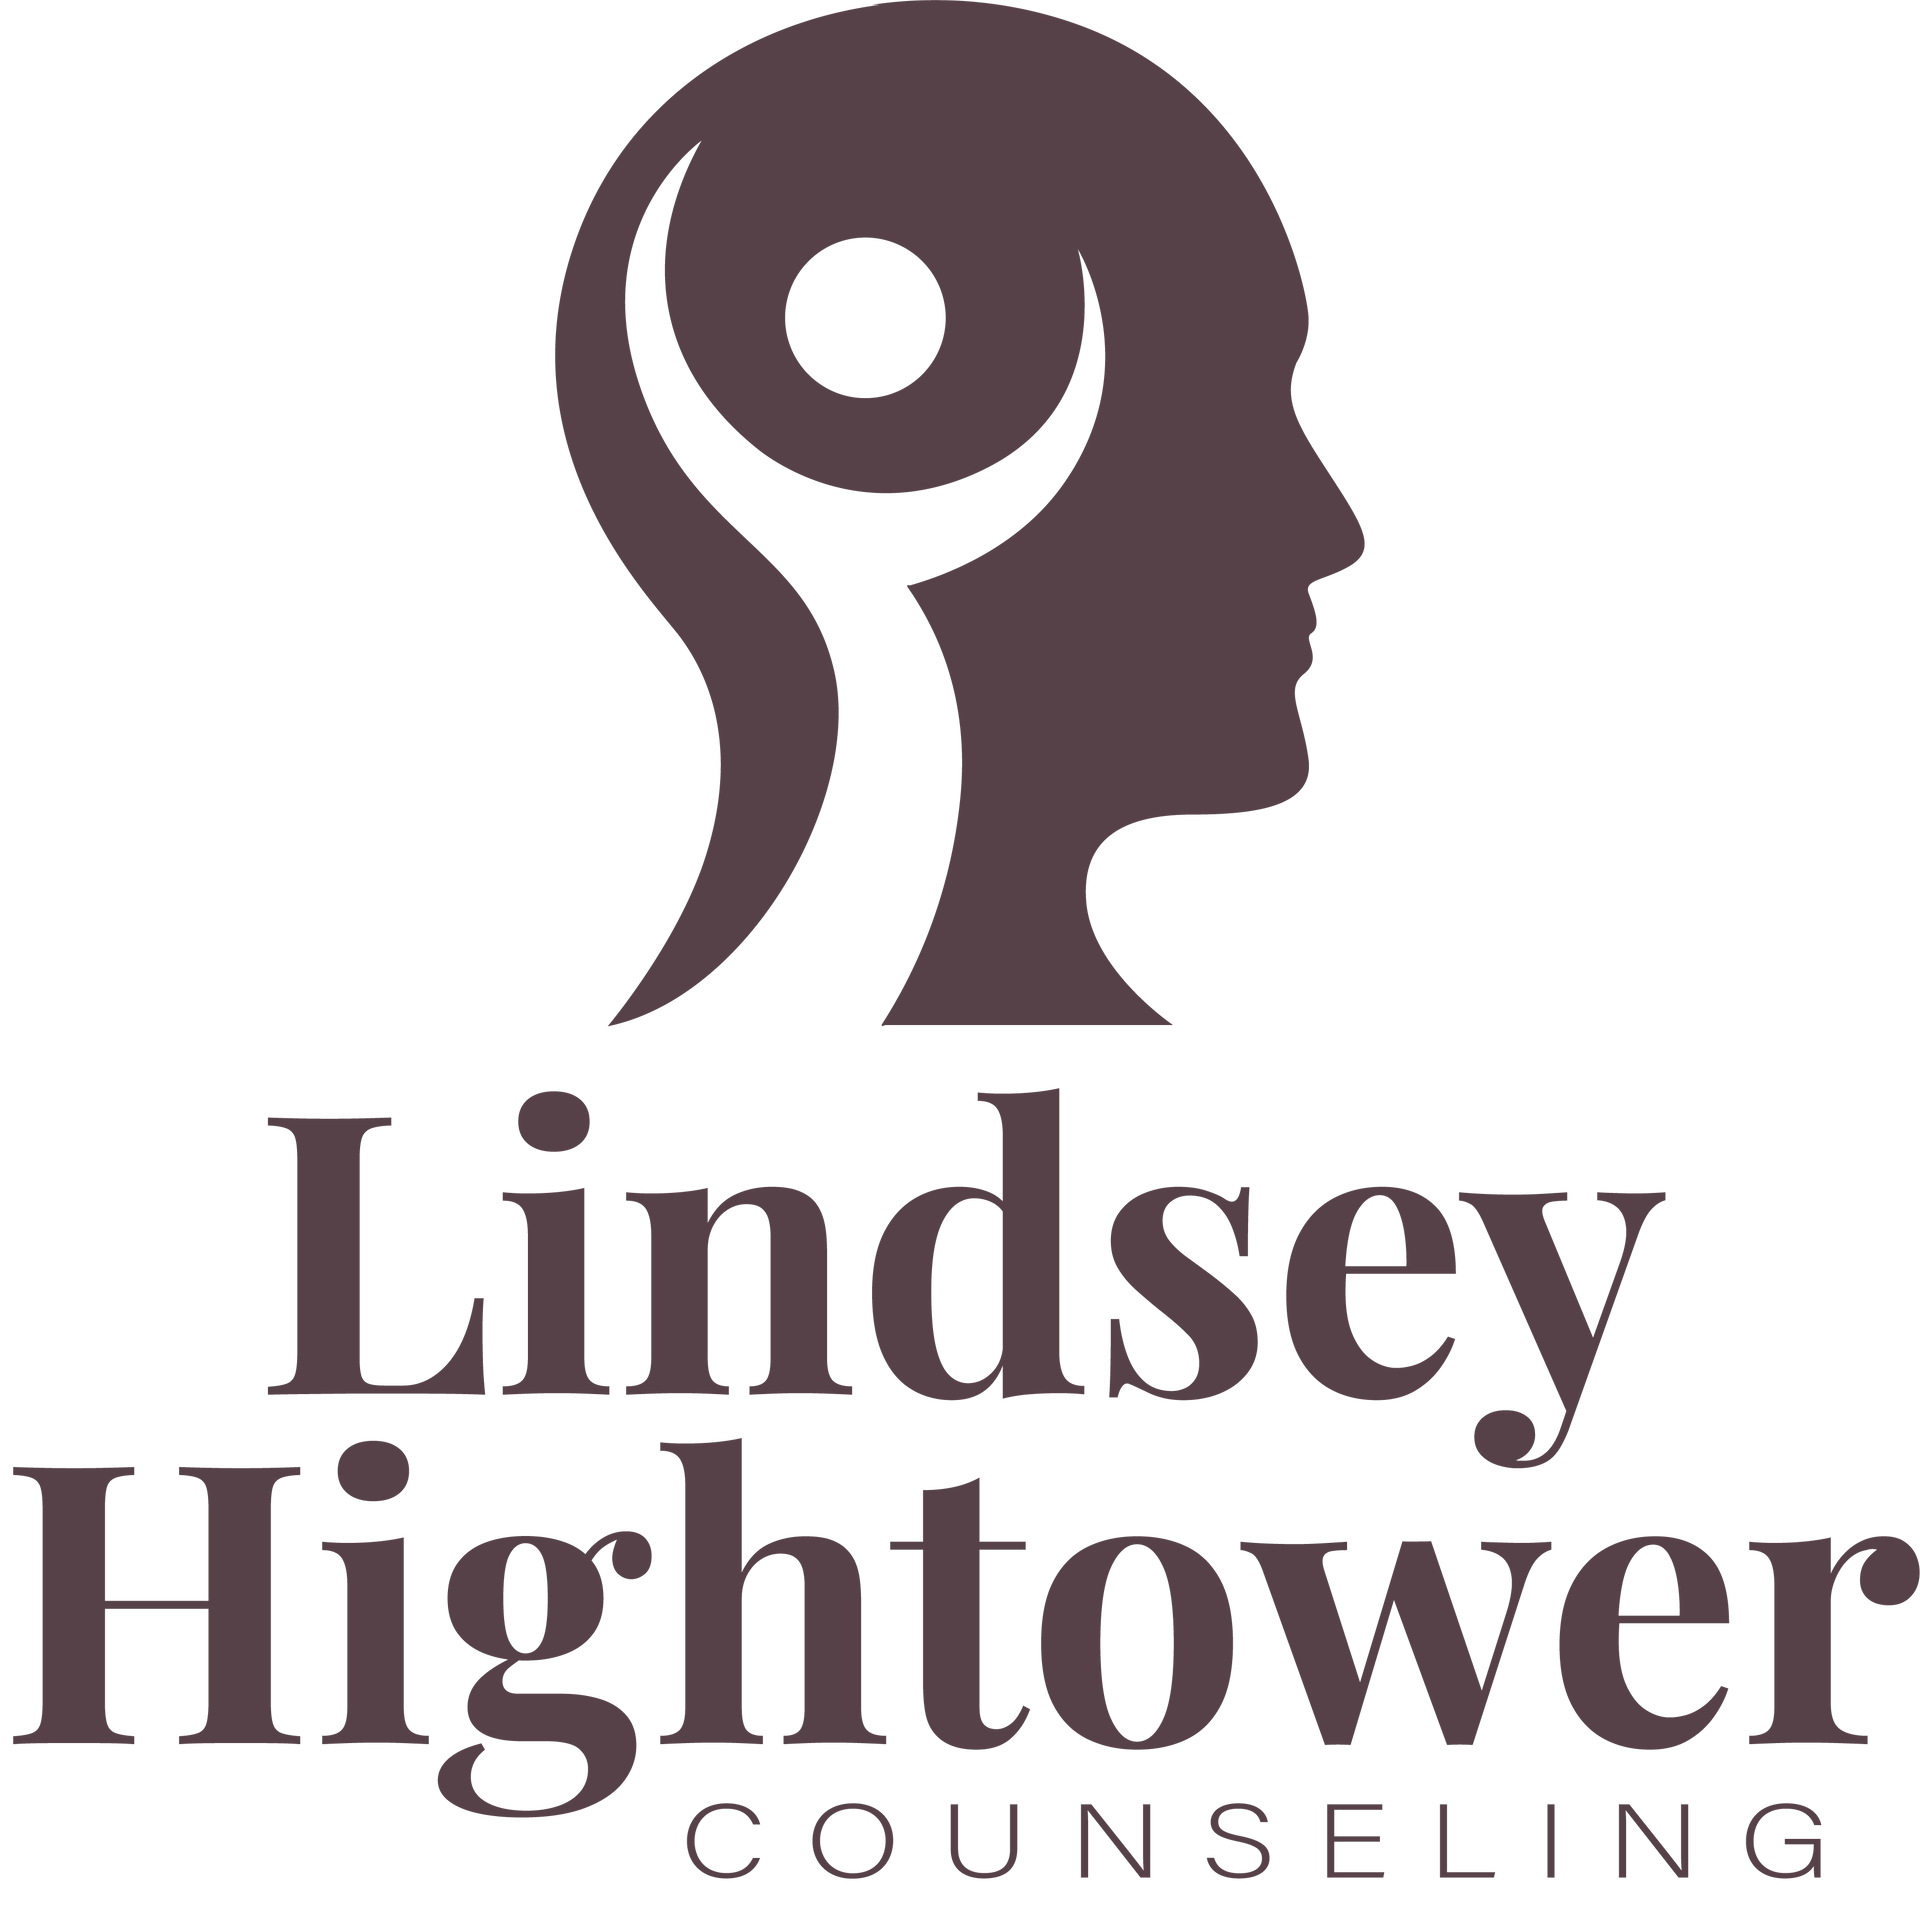 Counseling Tennessee - Lindsey Hightower Logo